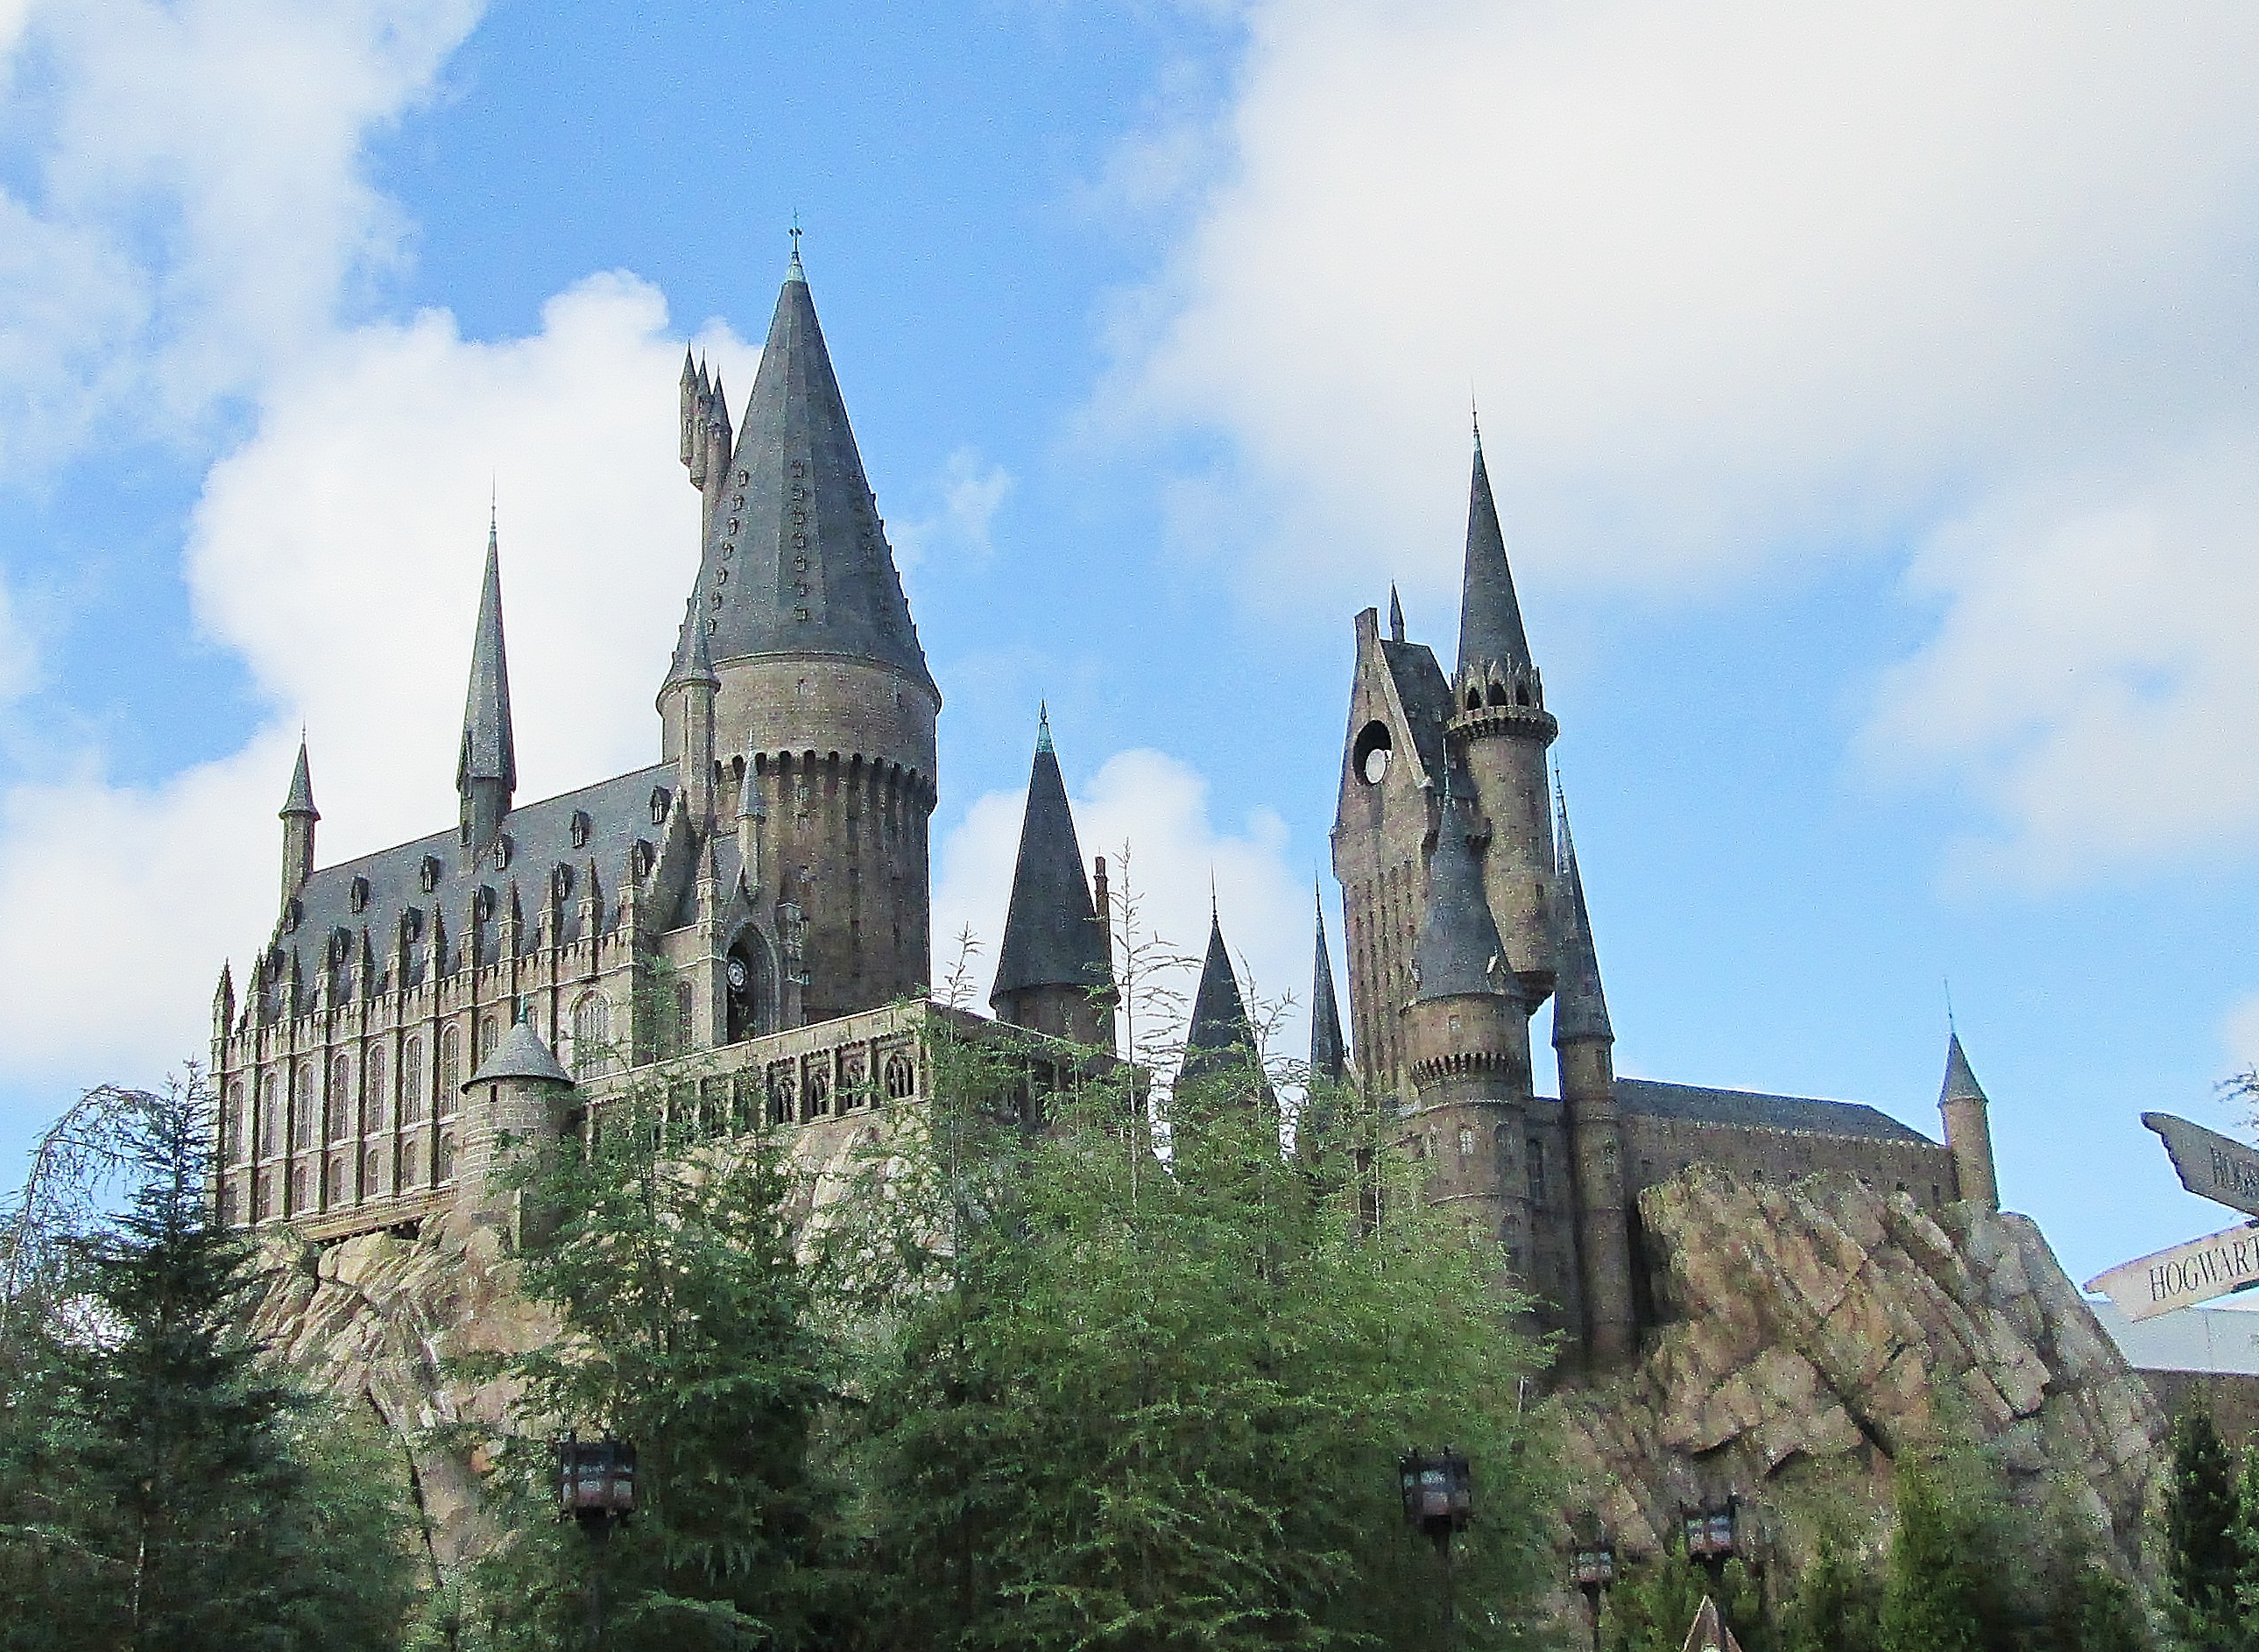 I WENT TO THE WIZARDING WORLD OF HARRY POTTER AT UNIVERSAL STUDIOS